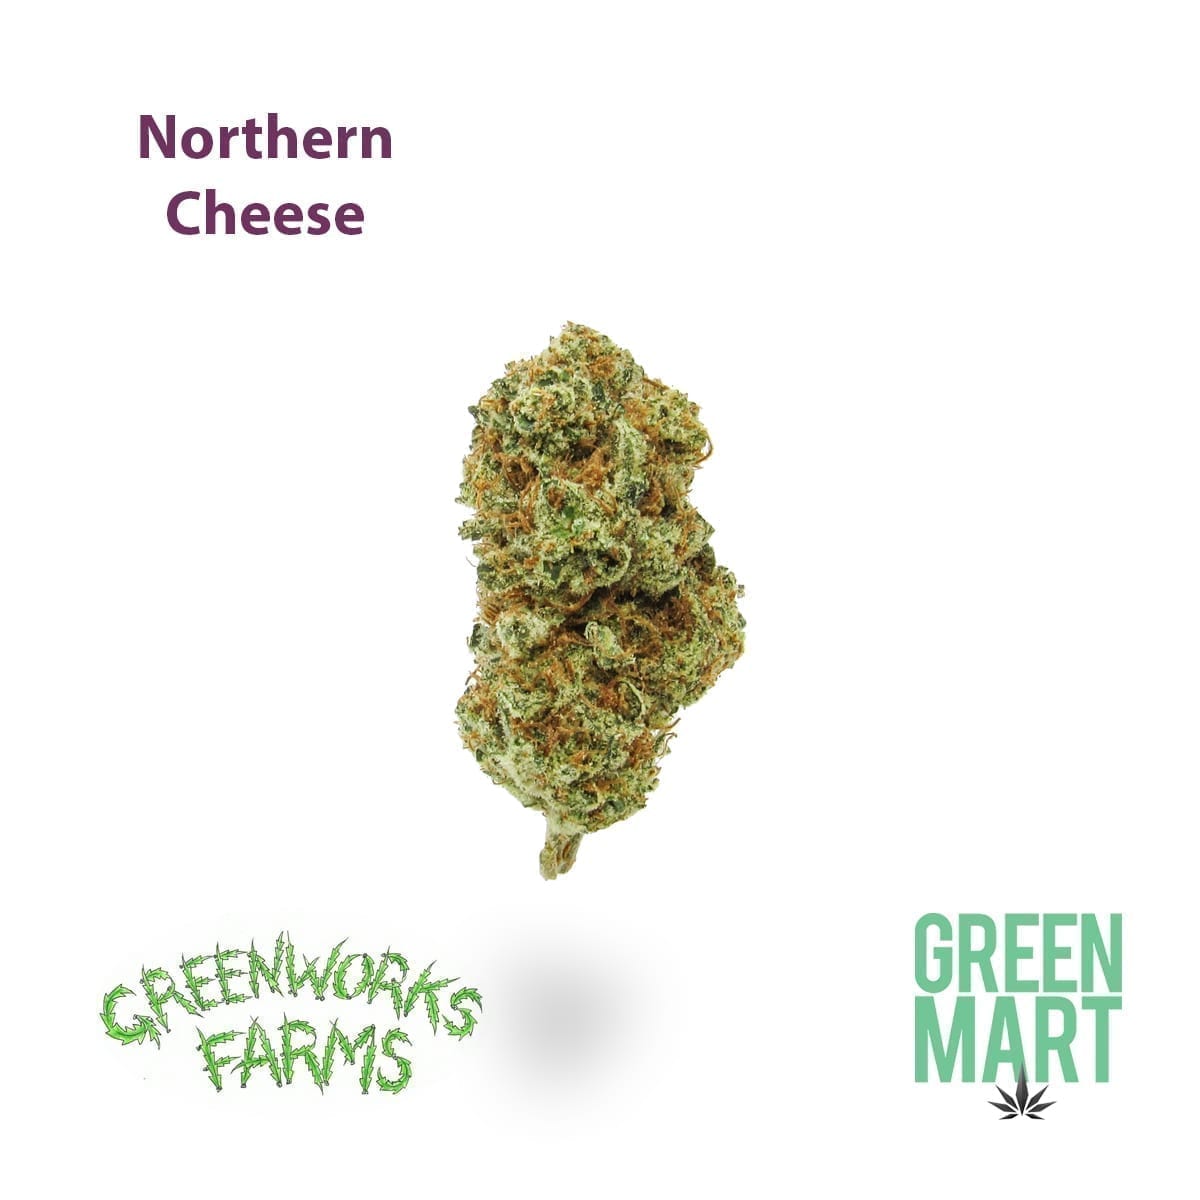 Greenworks Farms Northern Cheese Flower